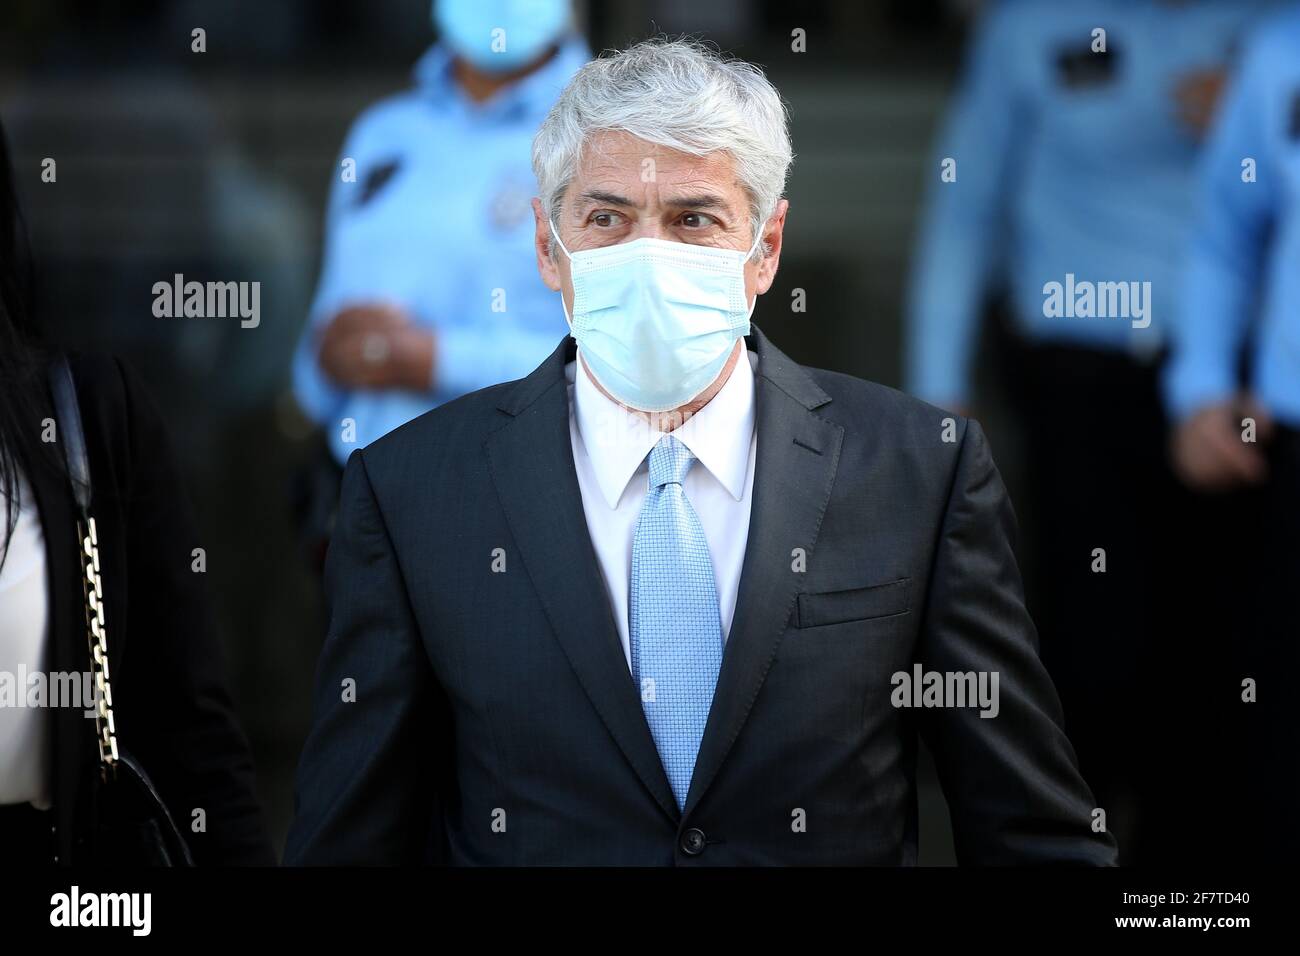 Lisbon, Portugal. 9th Apr, 2021. Portugal's former Prime Minister Jose Socrates wearing a face mask leaves the court after the instructional decision session of the high-profile corruption case known as Operation Marques, at the Justice Campus in Lisbon, Portugal, 09 April 2021. Credit: Pedro Fiuza/ZUMA Wire/Alamy Live News Stock Photo